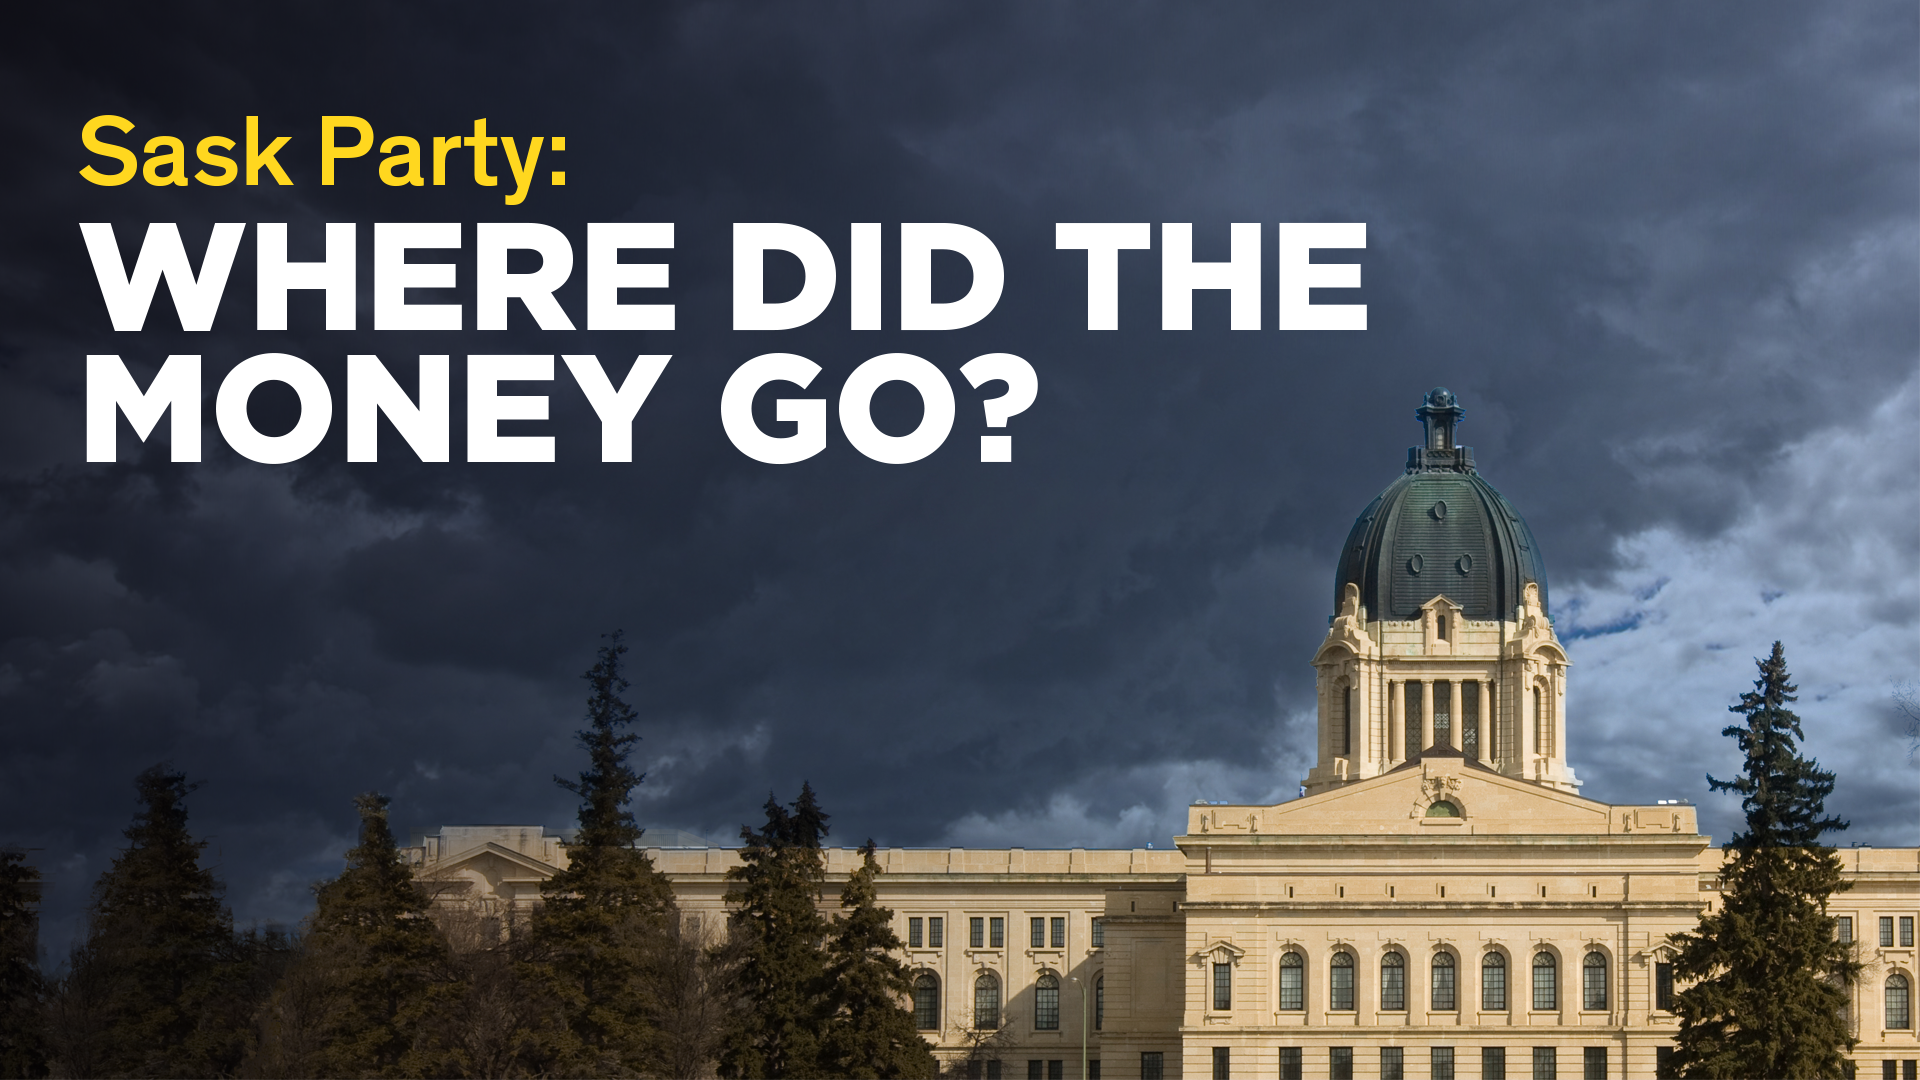 Rally will hold Sask Party government accountable for misspending and cuts to vital public services